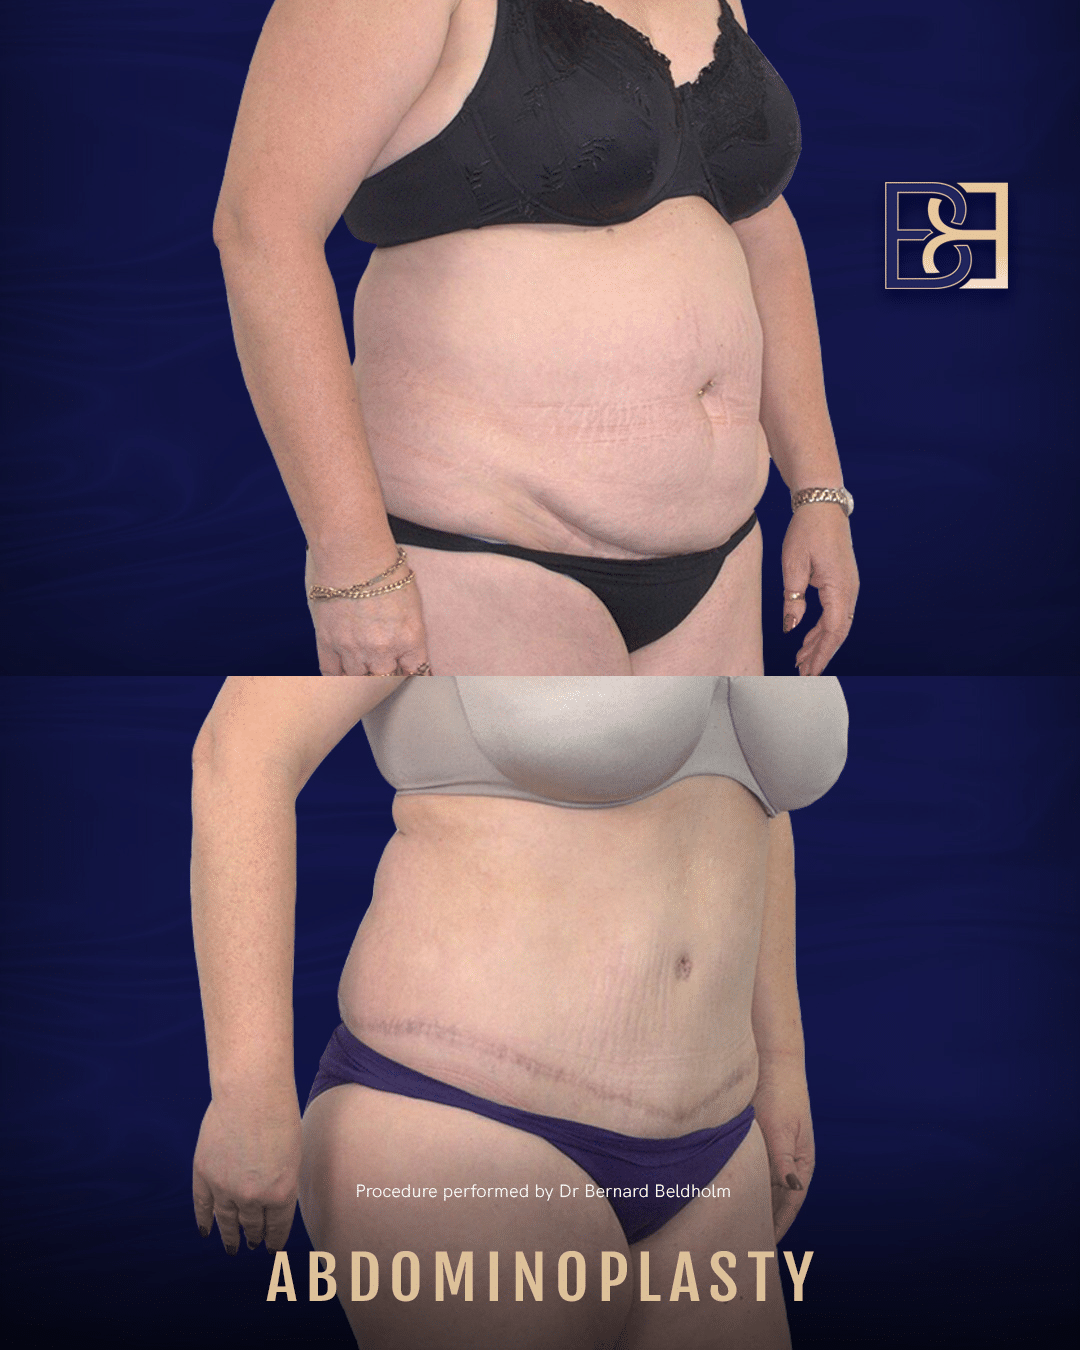 Tummy Tuck 3 Week Update  Before and After Pictures & Full